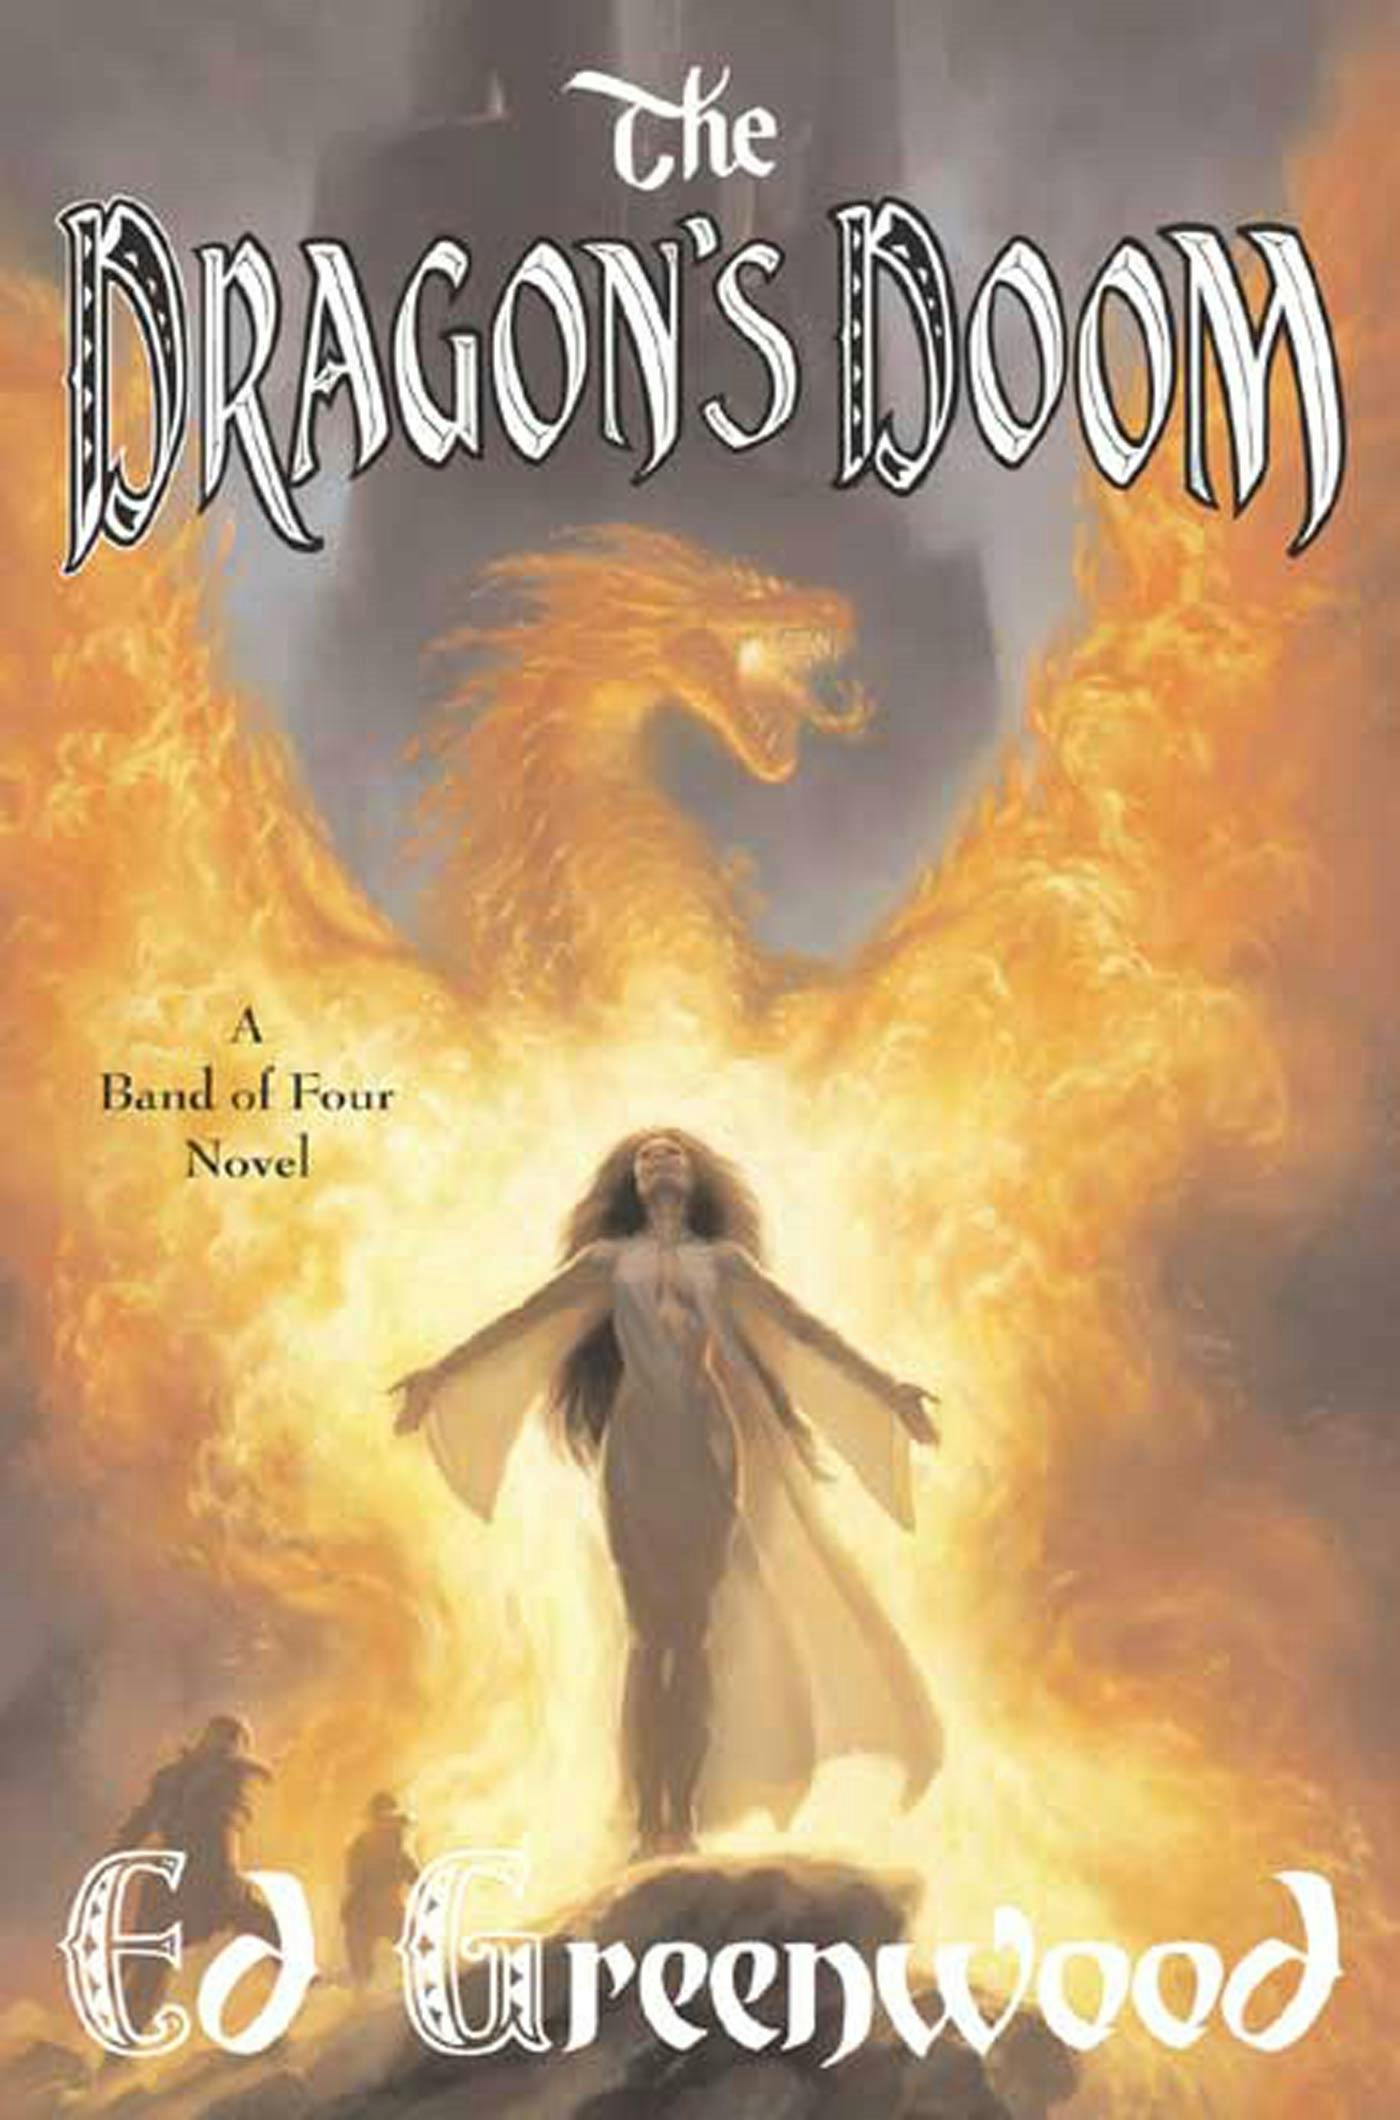 Cover for the book titled as: The Dragon's Doom